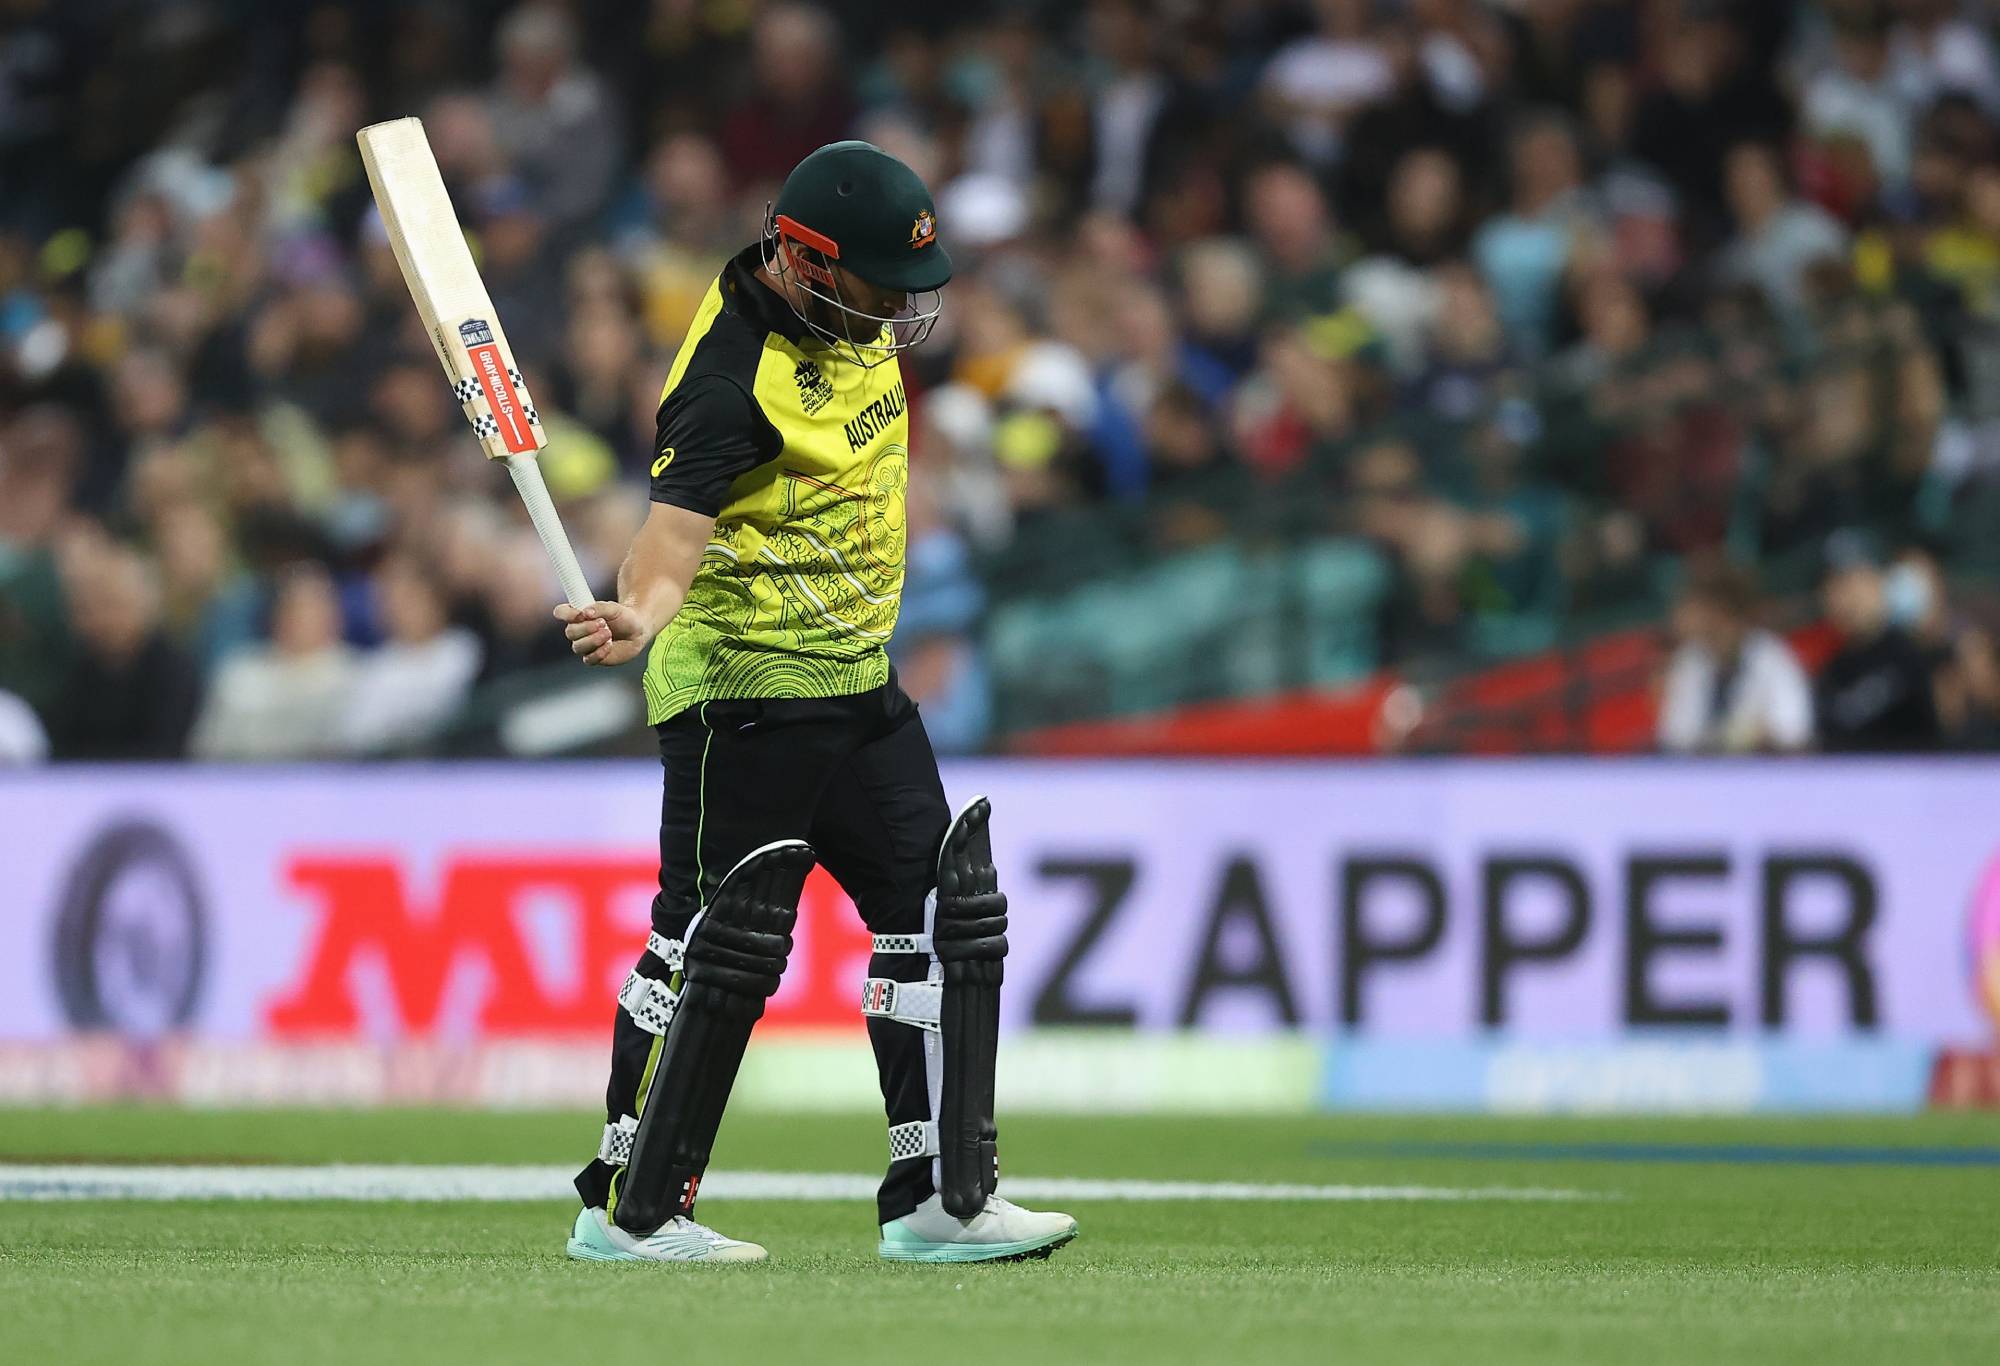 SYDNEY, AUSTRALIA - OCTOBER 22: Aaron Finch of Australia leaves the field after being dismissed by Mitchell Santner of New Zealand during the ICC Men's T20 World Cup match between Australia and New Zealand at Sydney Cricket Ground on October 22, 2022 in Sydney, Australia. (Photo by Mark Kolbe/Getty Images)